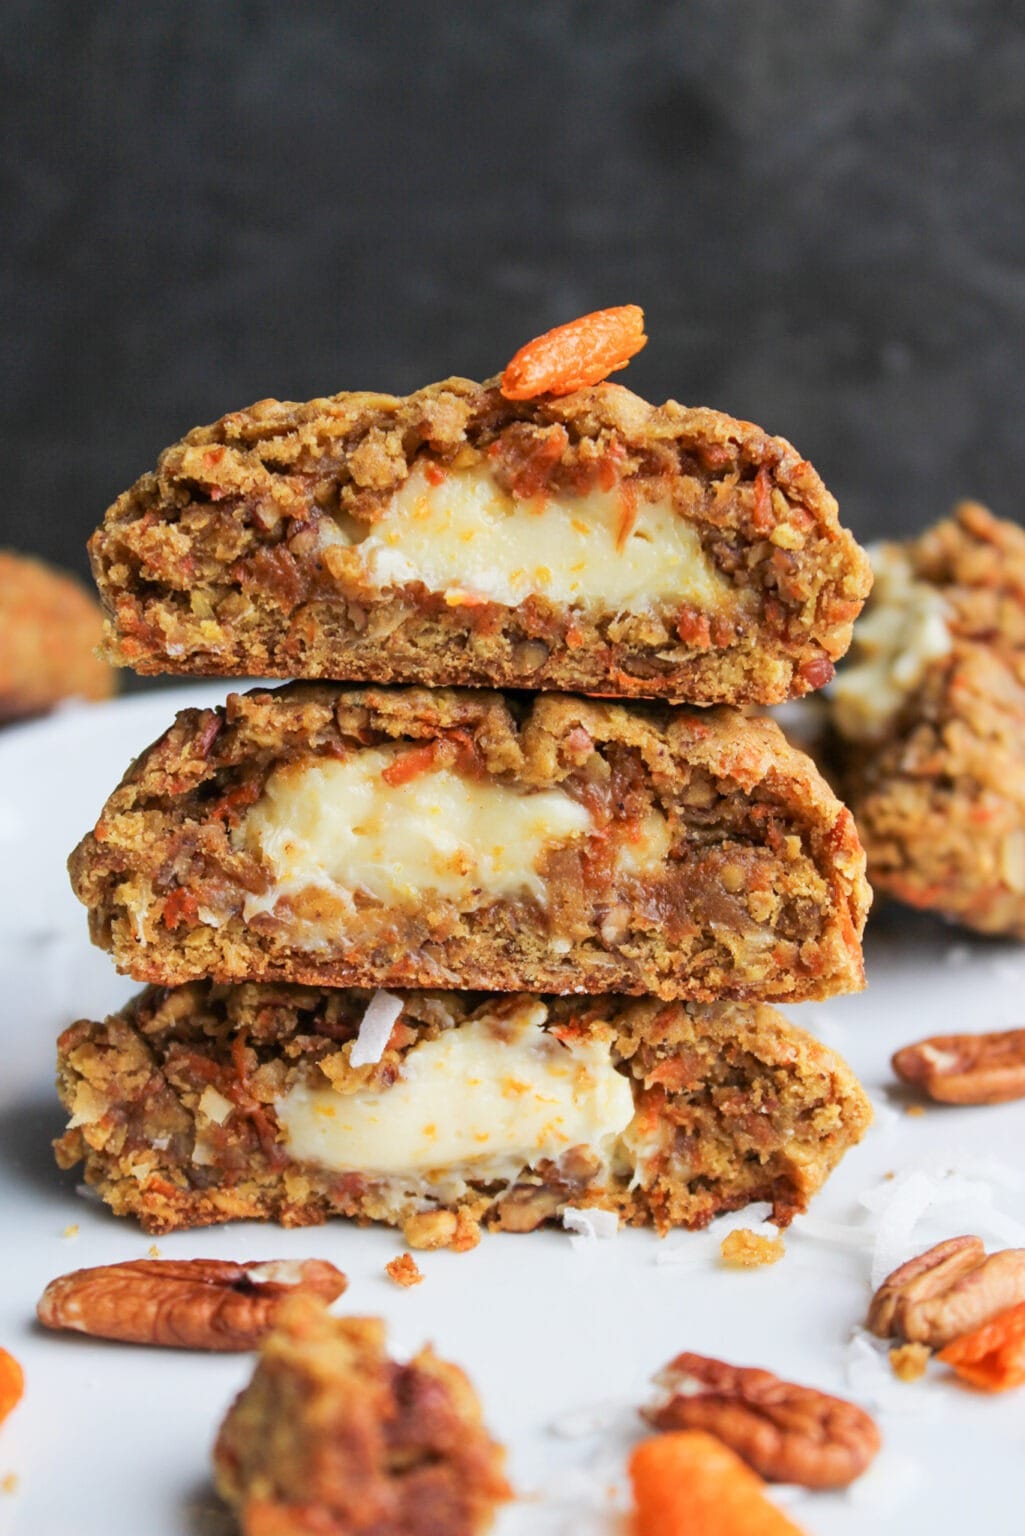 Stacks of homemade Stuffed Carrot Cake Cookies with pecans